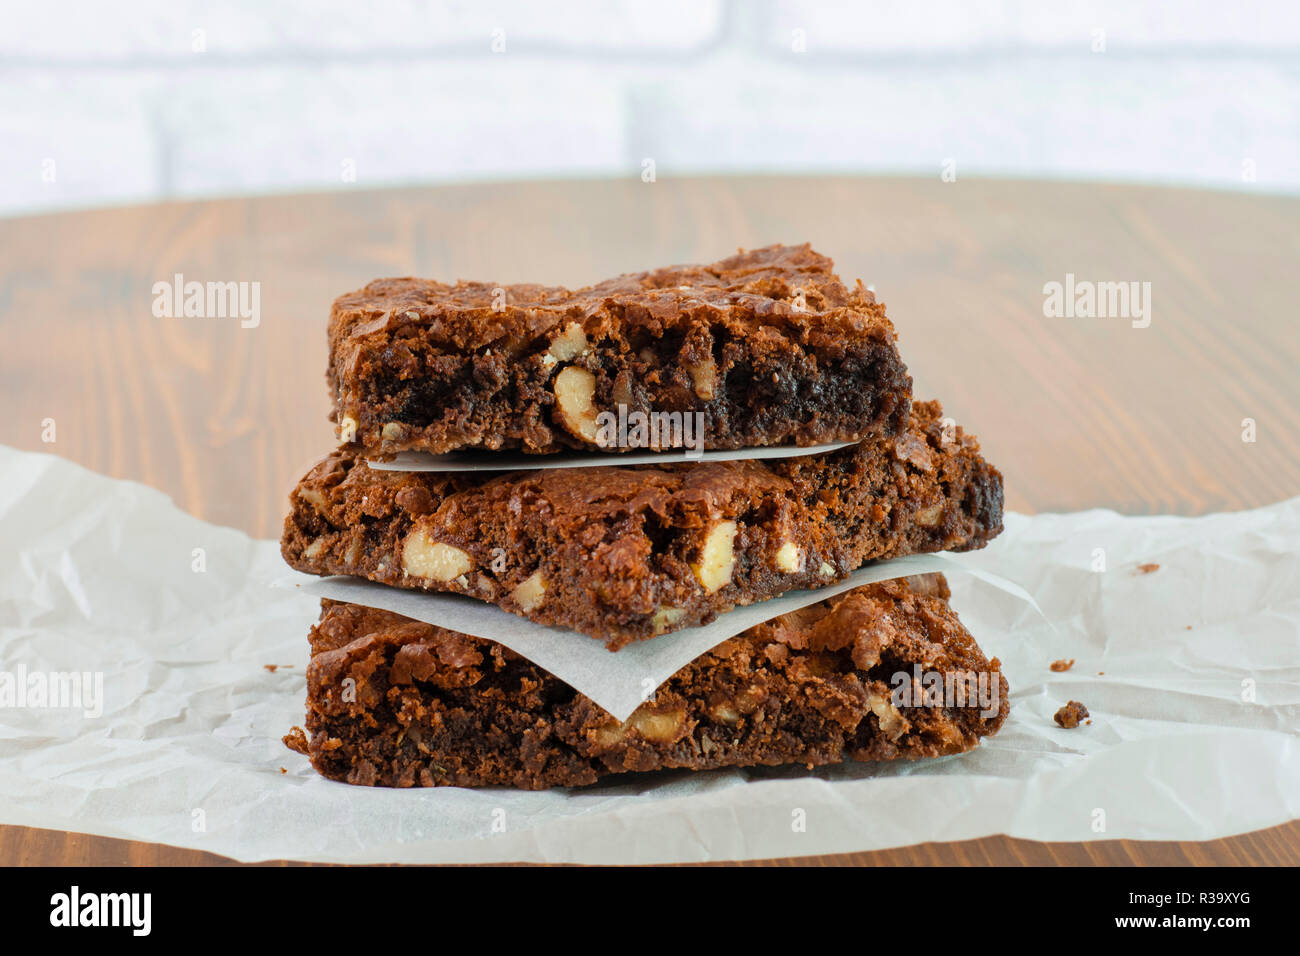 Sliced delicious brownie with hot chocolate melting sauce on it. Stock Photo